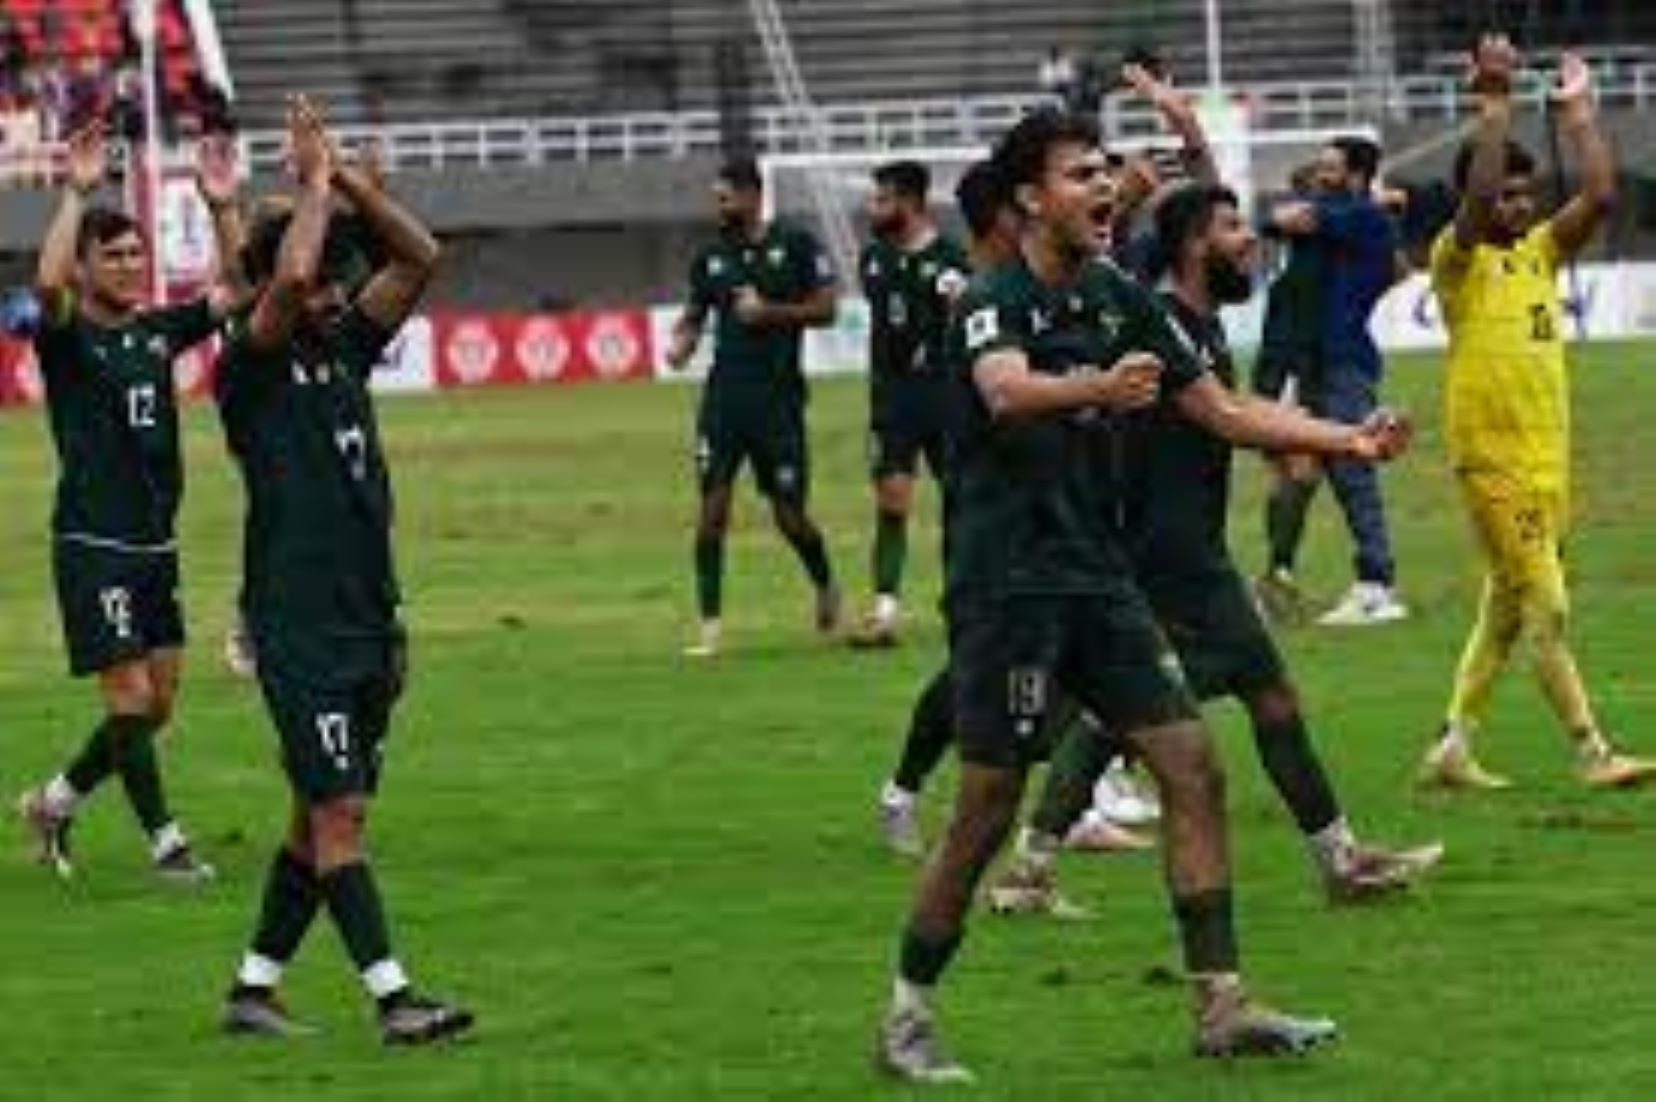 Pakistan Edged Cambodia For First Win In FIFA World Cup Qualifier